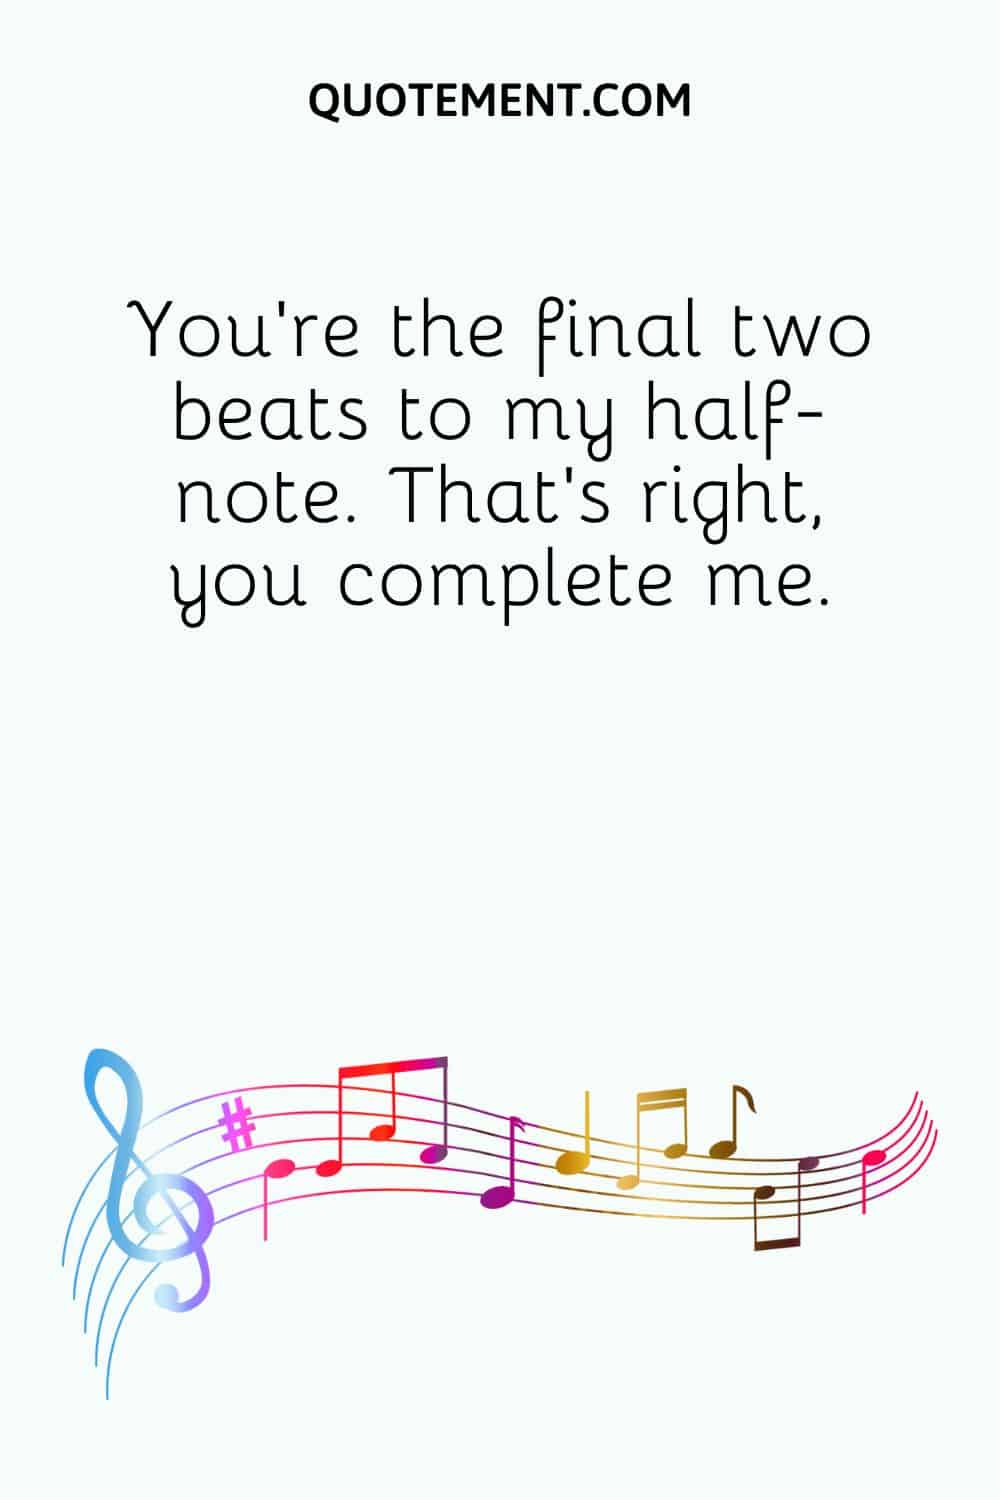 You’re the final two beats to my half-note. That’s right, you complete me